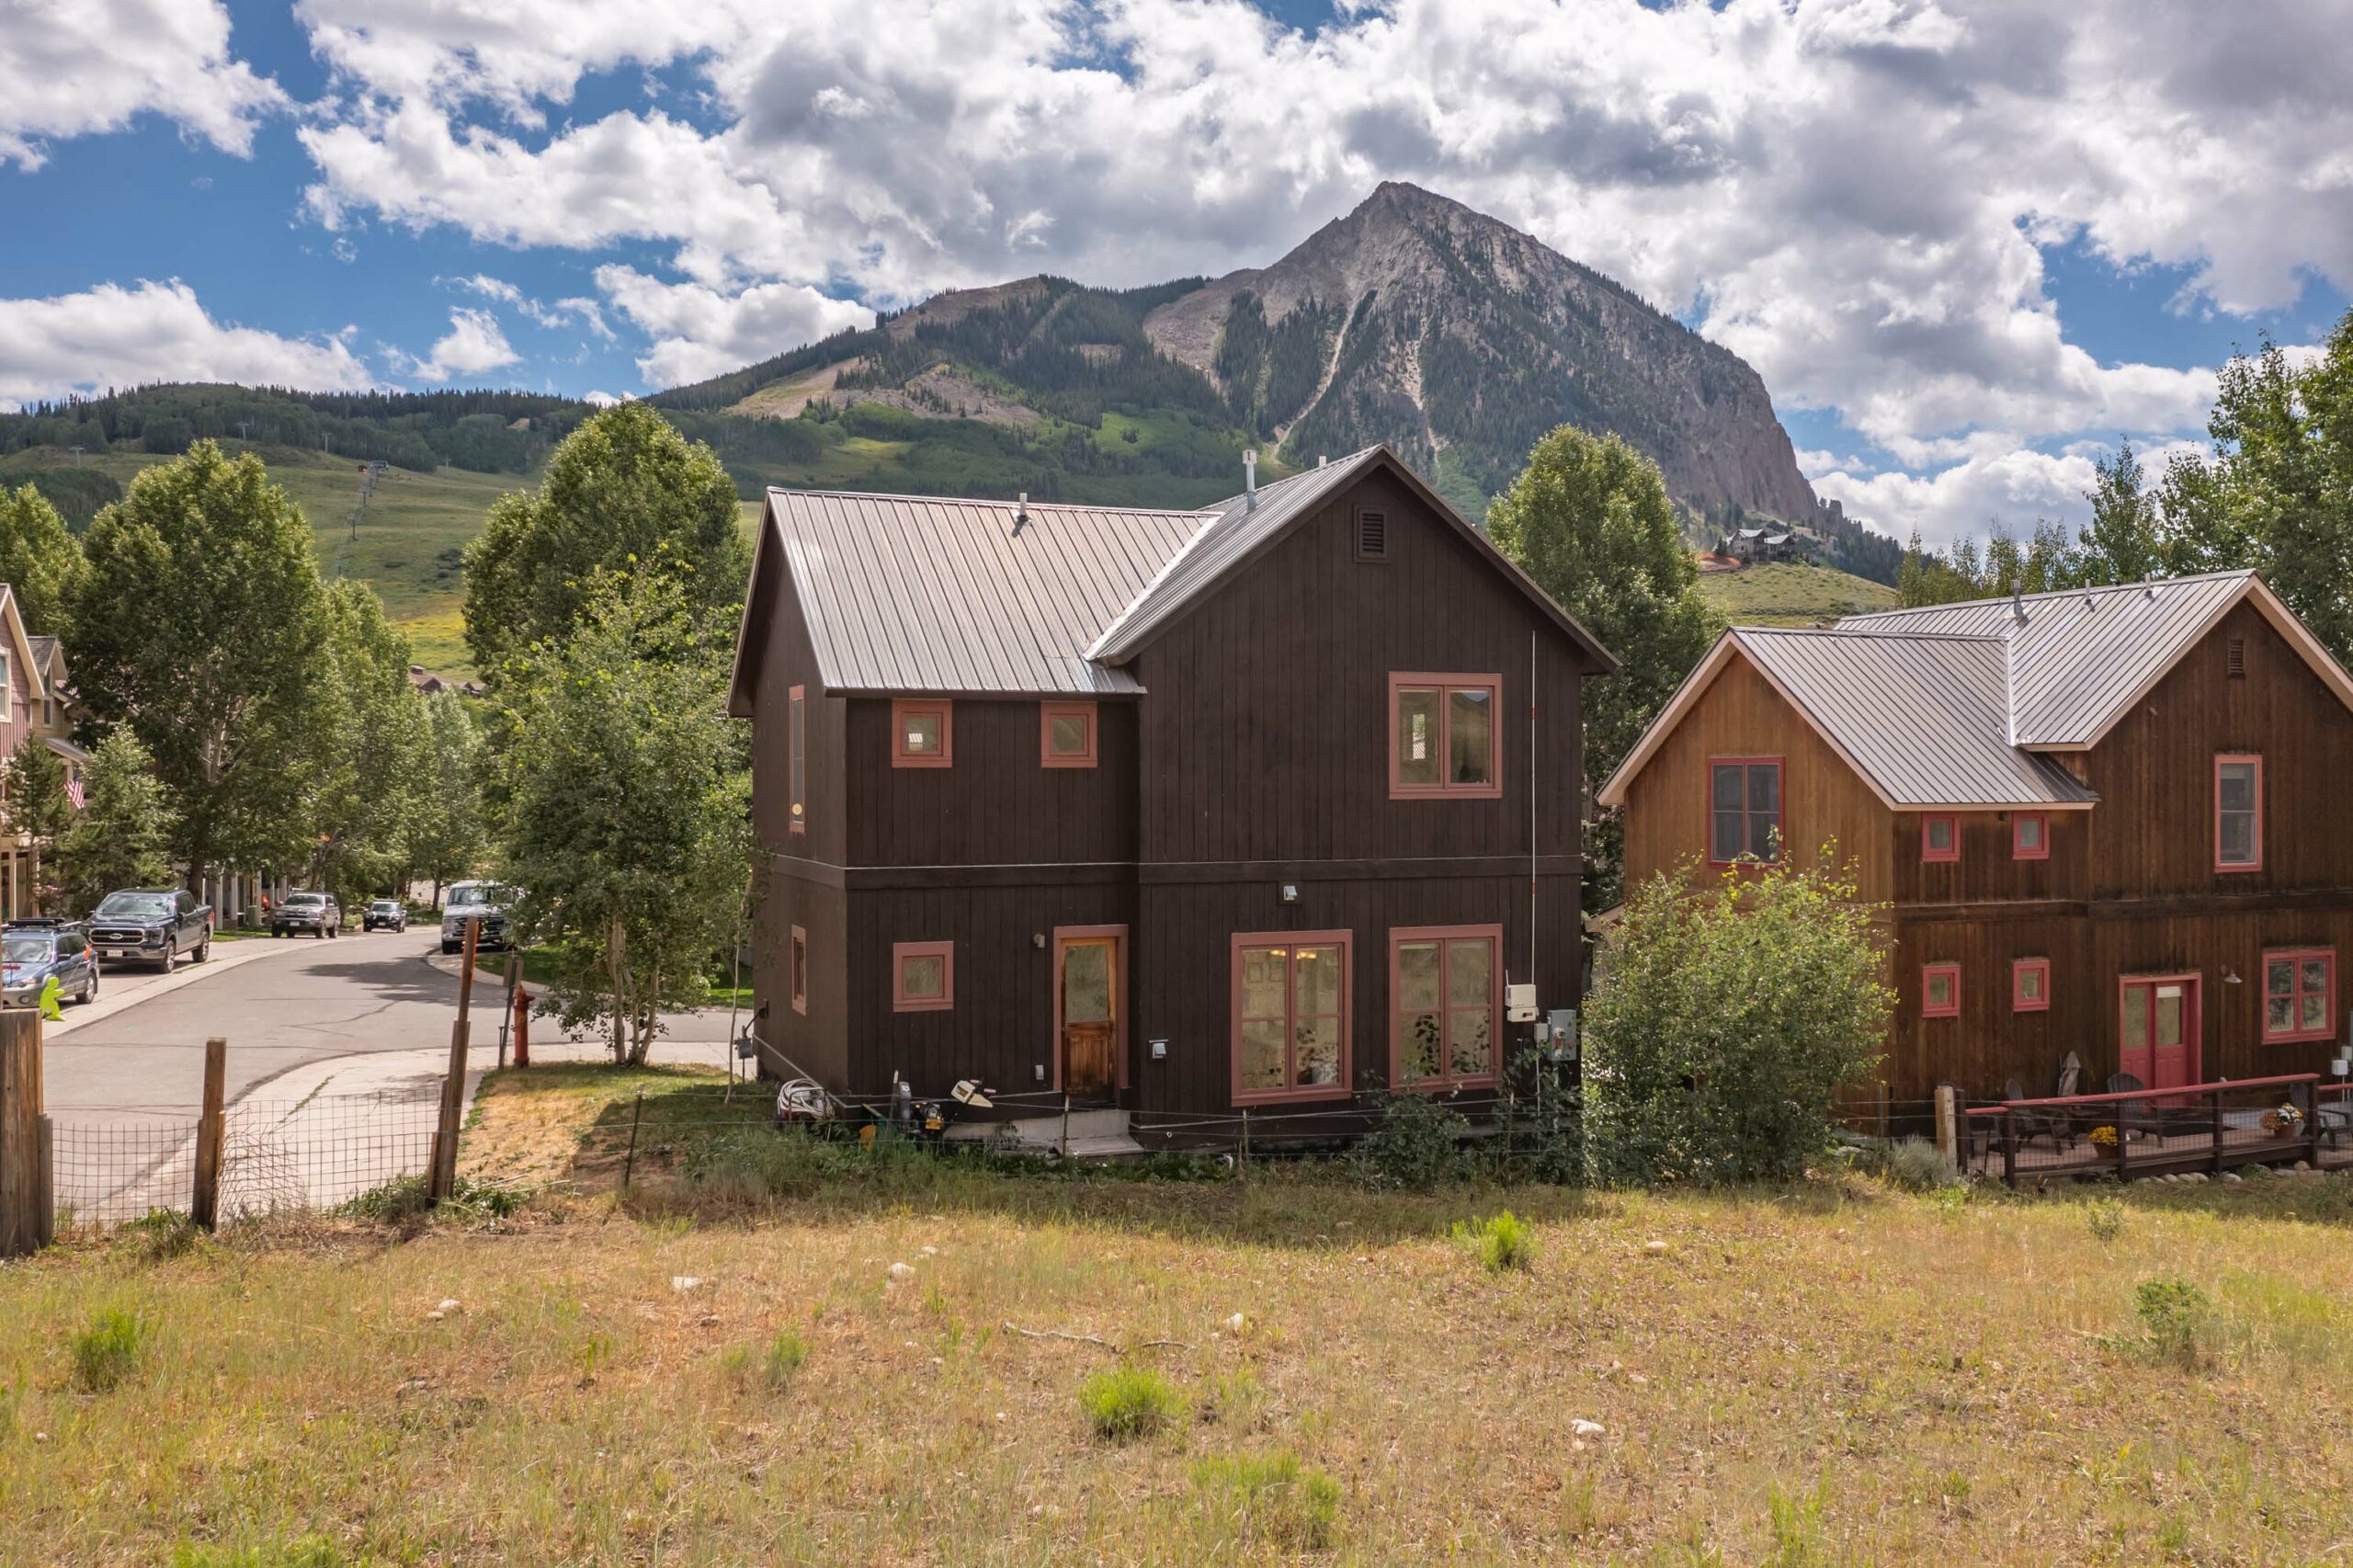 102 Horseshoe Drive Mt. Crested Butte, Colorado - back of property